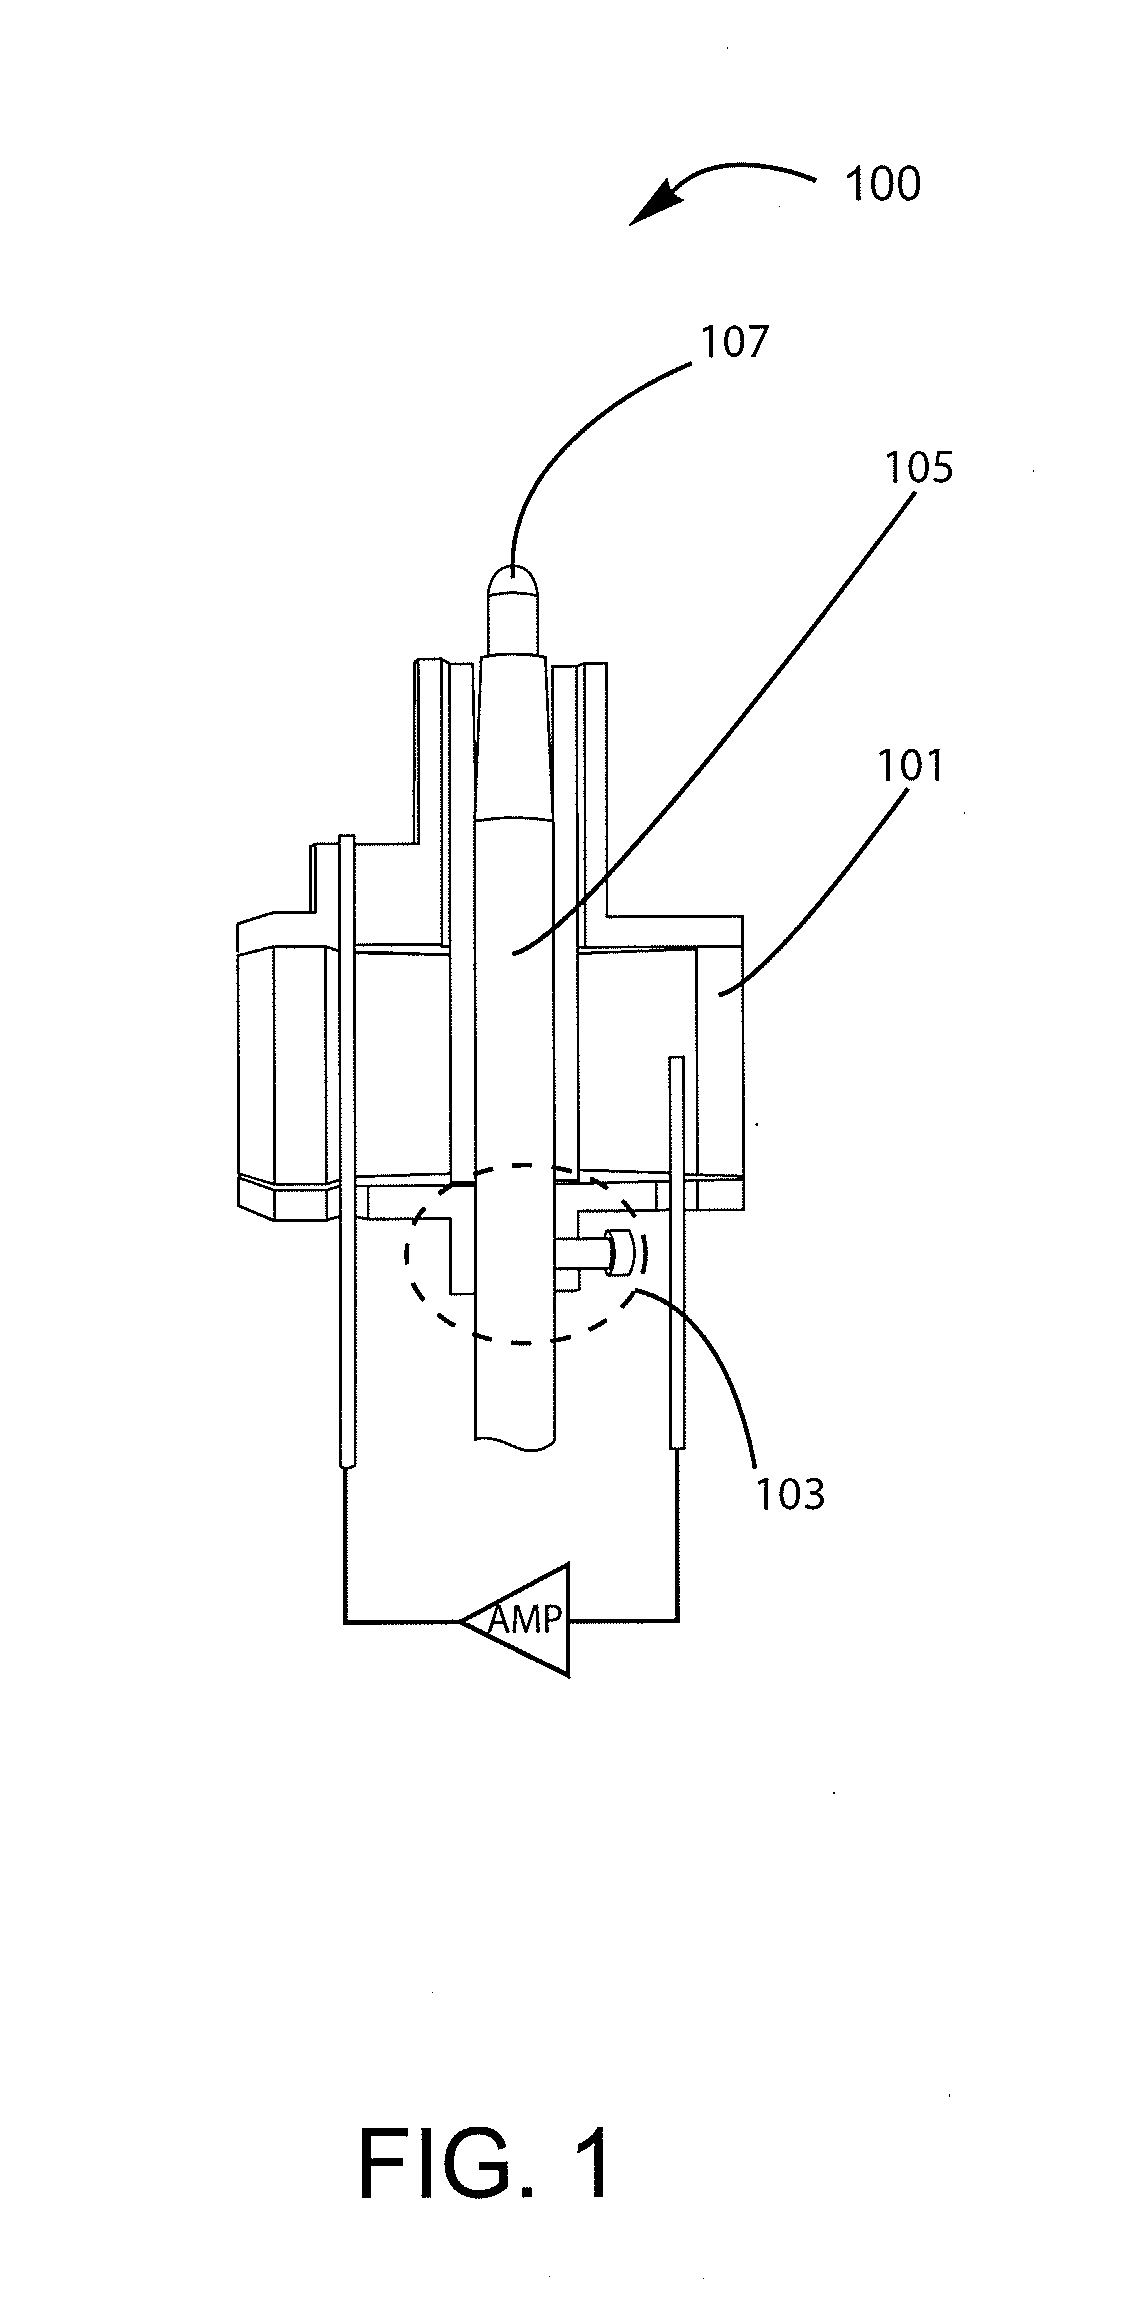 Method and System for Replacing a Plasma Lamp Using a Removable Base Member from a Resonator Assembly